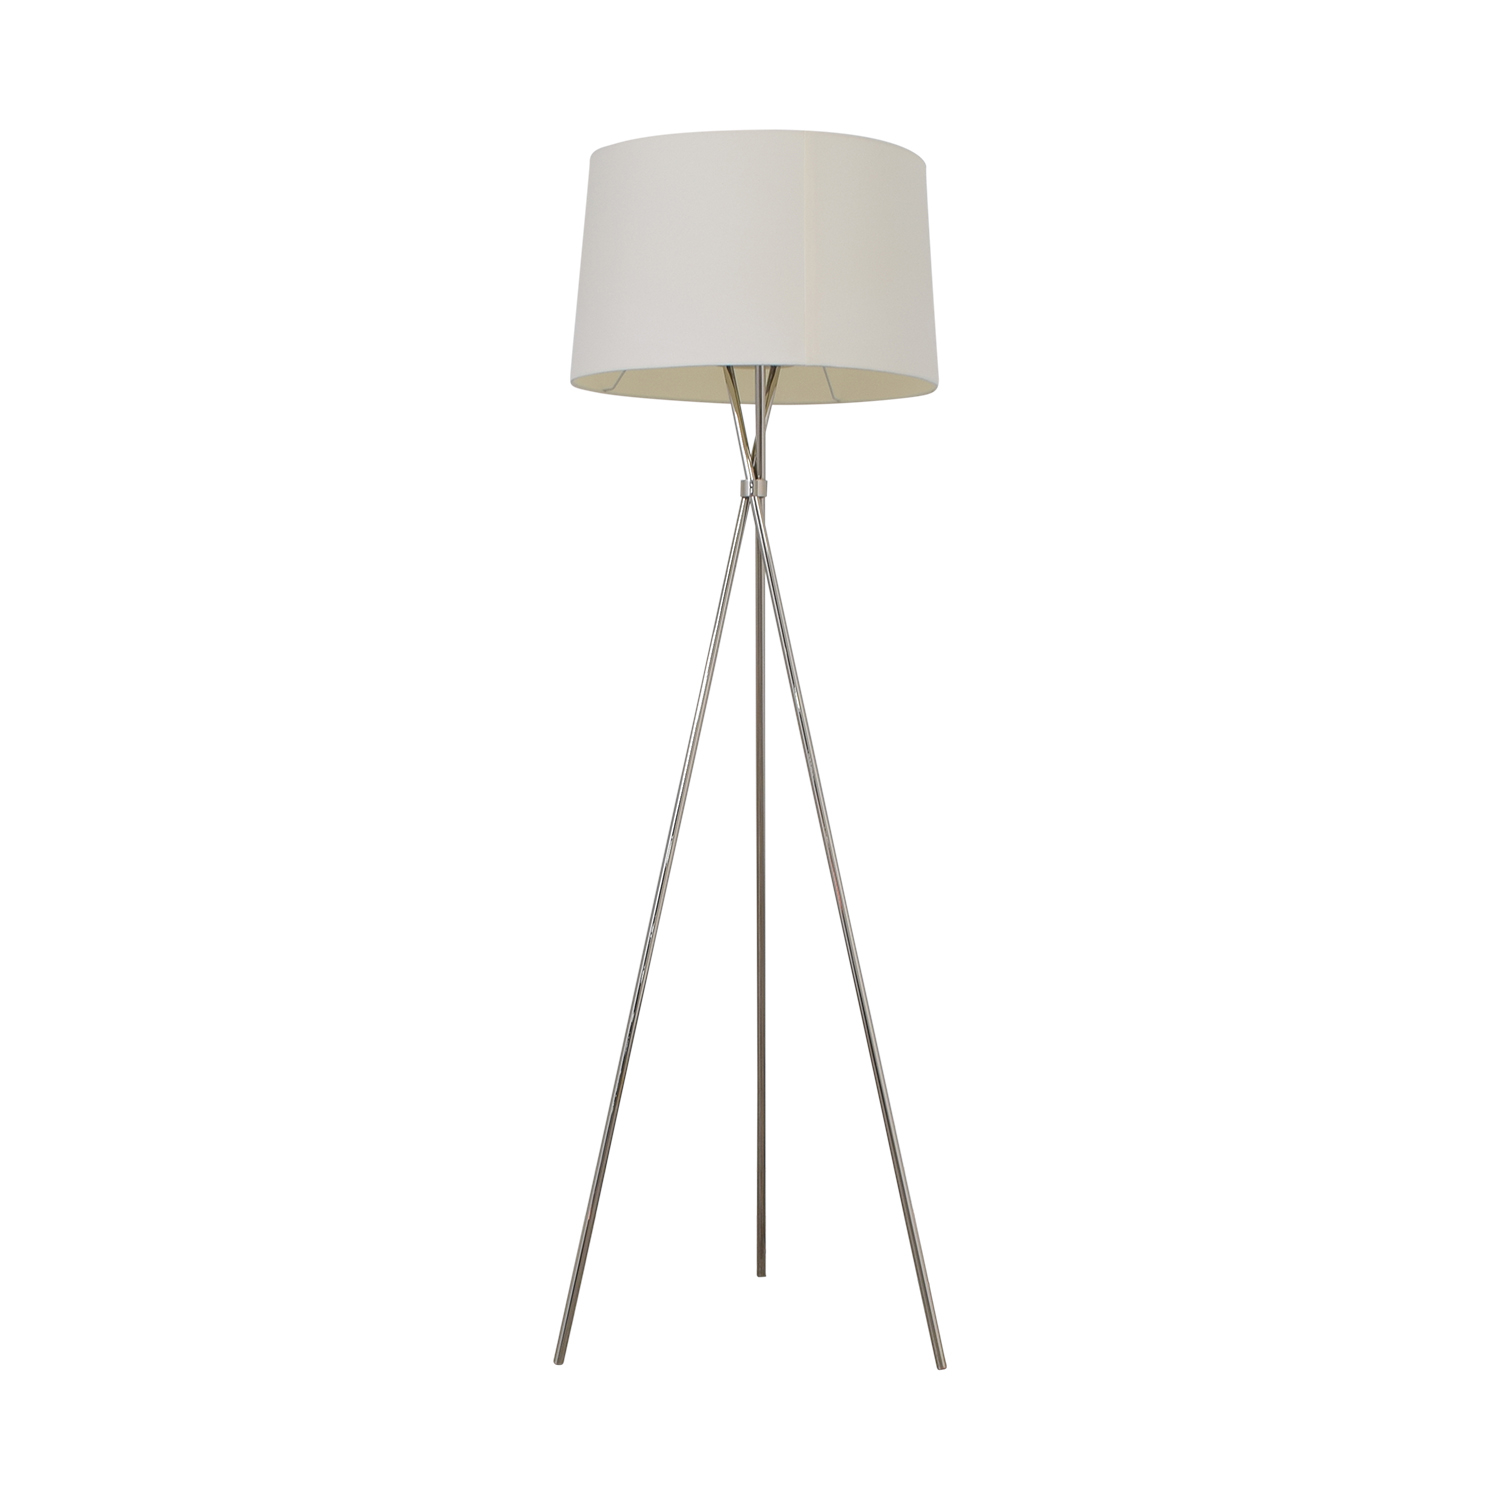 54 Off Design Within Reach Design Within Reach Tripod Floor Lamp Decor for dimensions 1500 X 1500